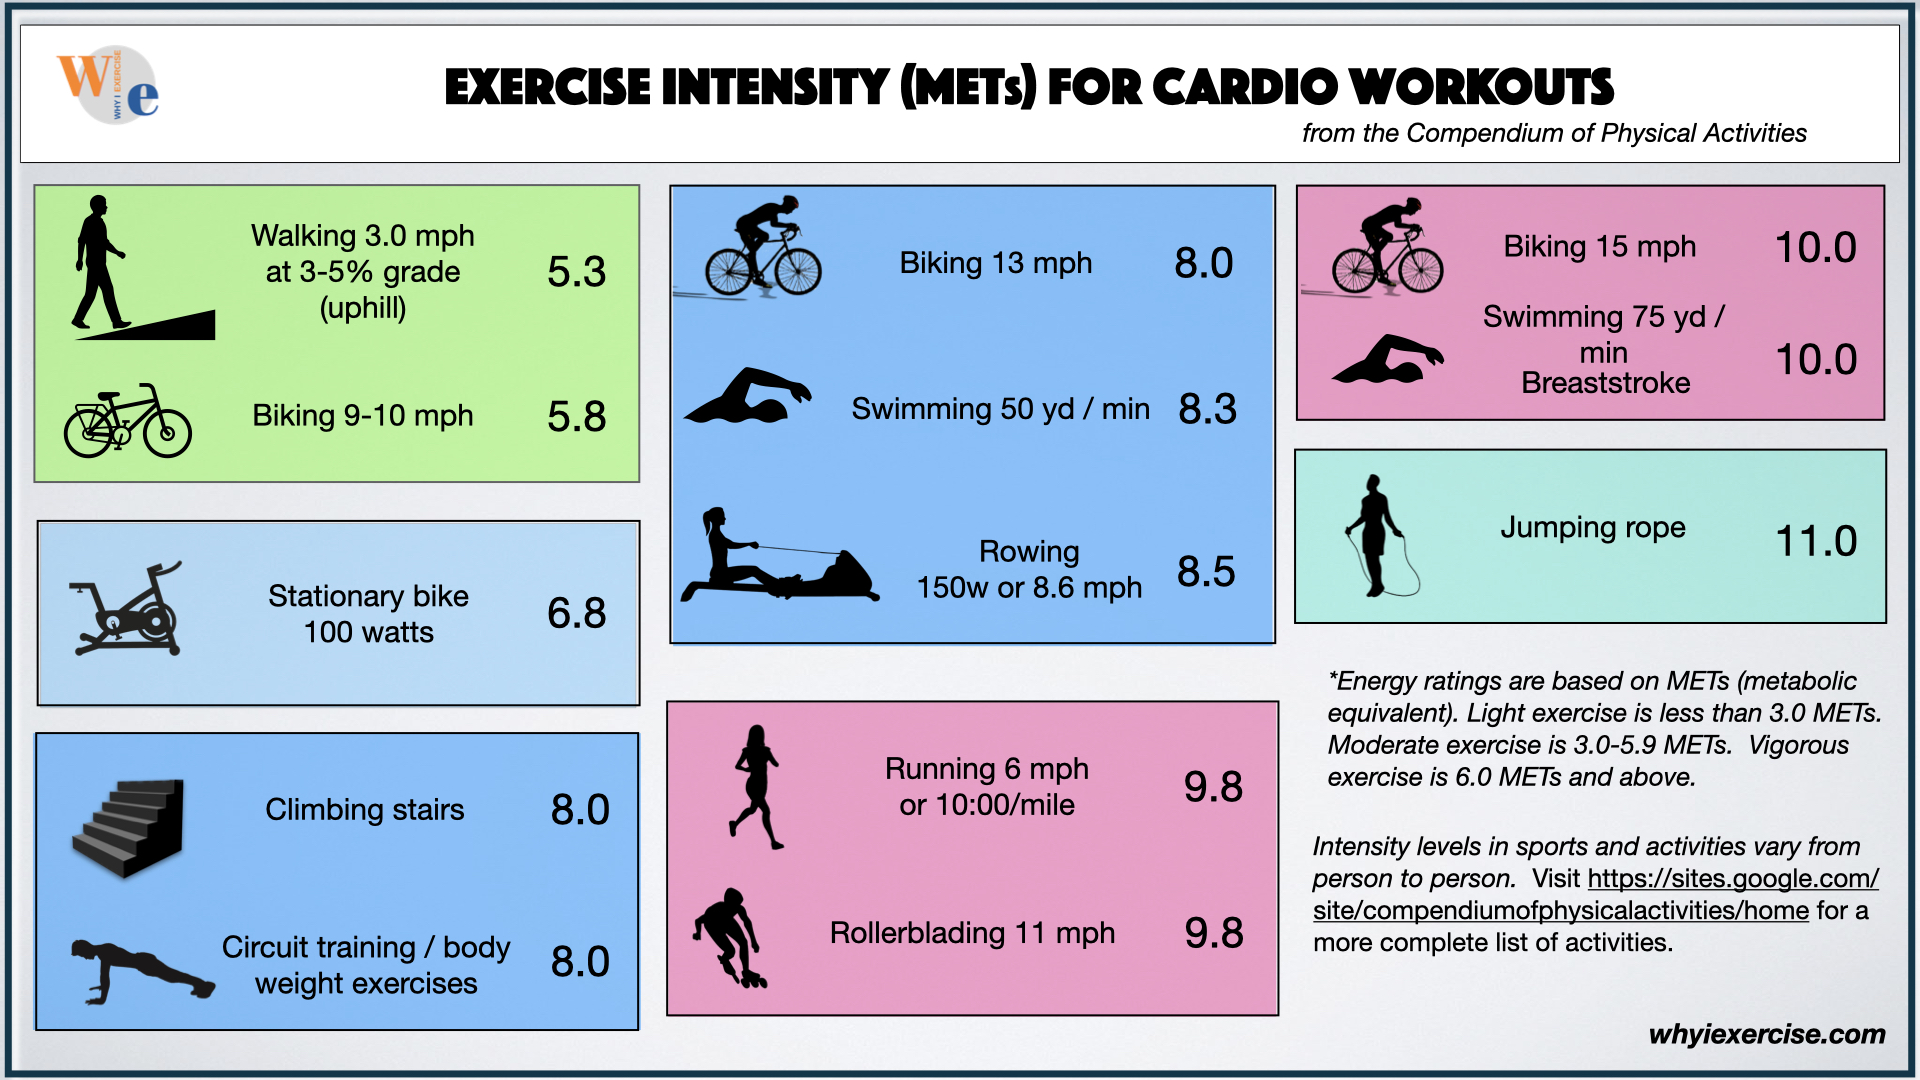 comparing METs for cardio workouts and exercises